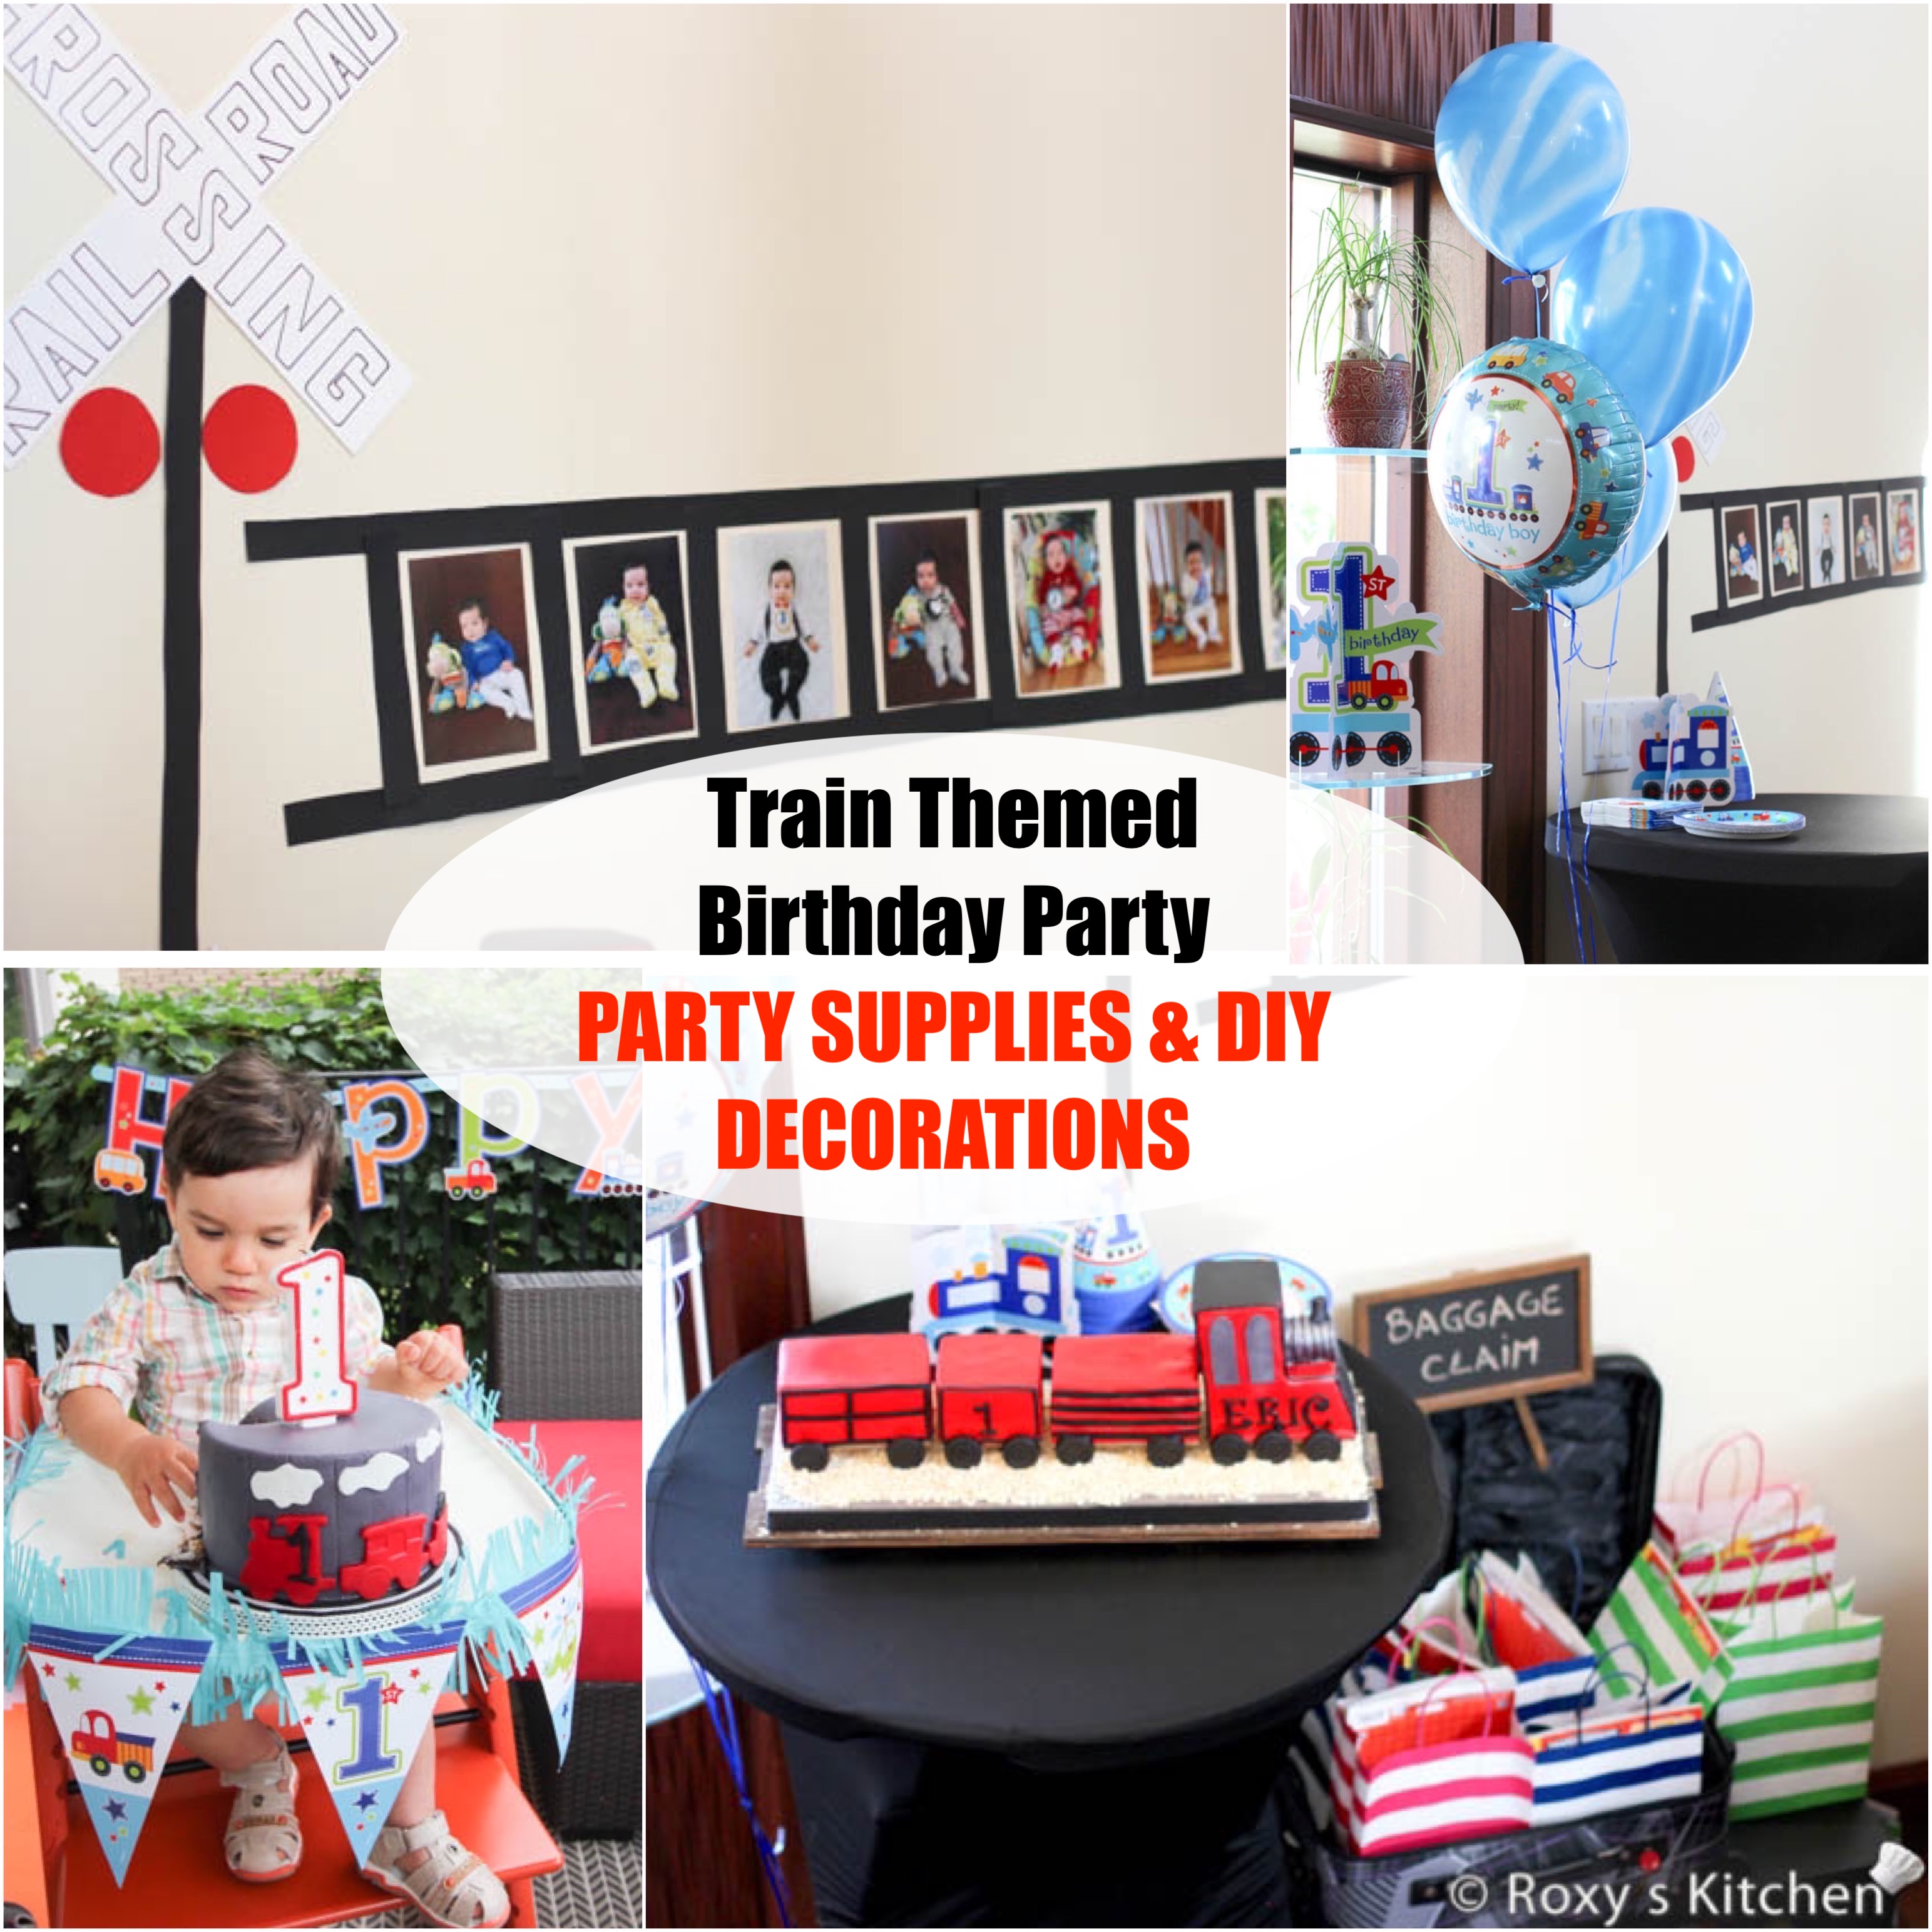 Birthday decoration ideas: DIY decor tips & affordable party props